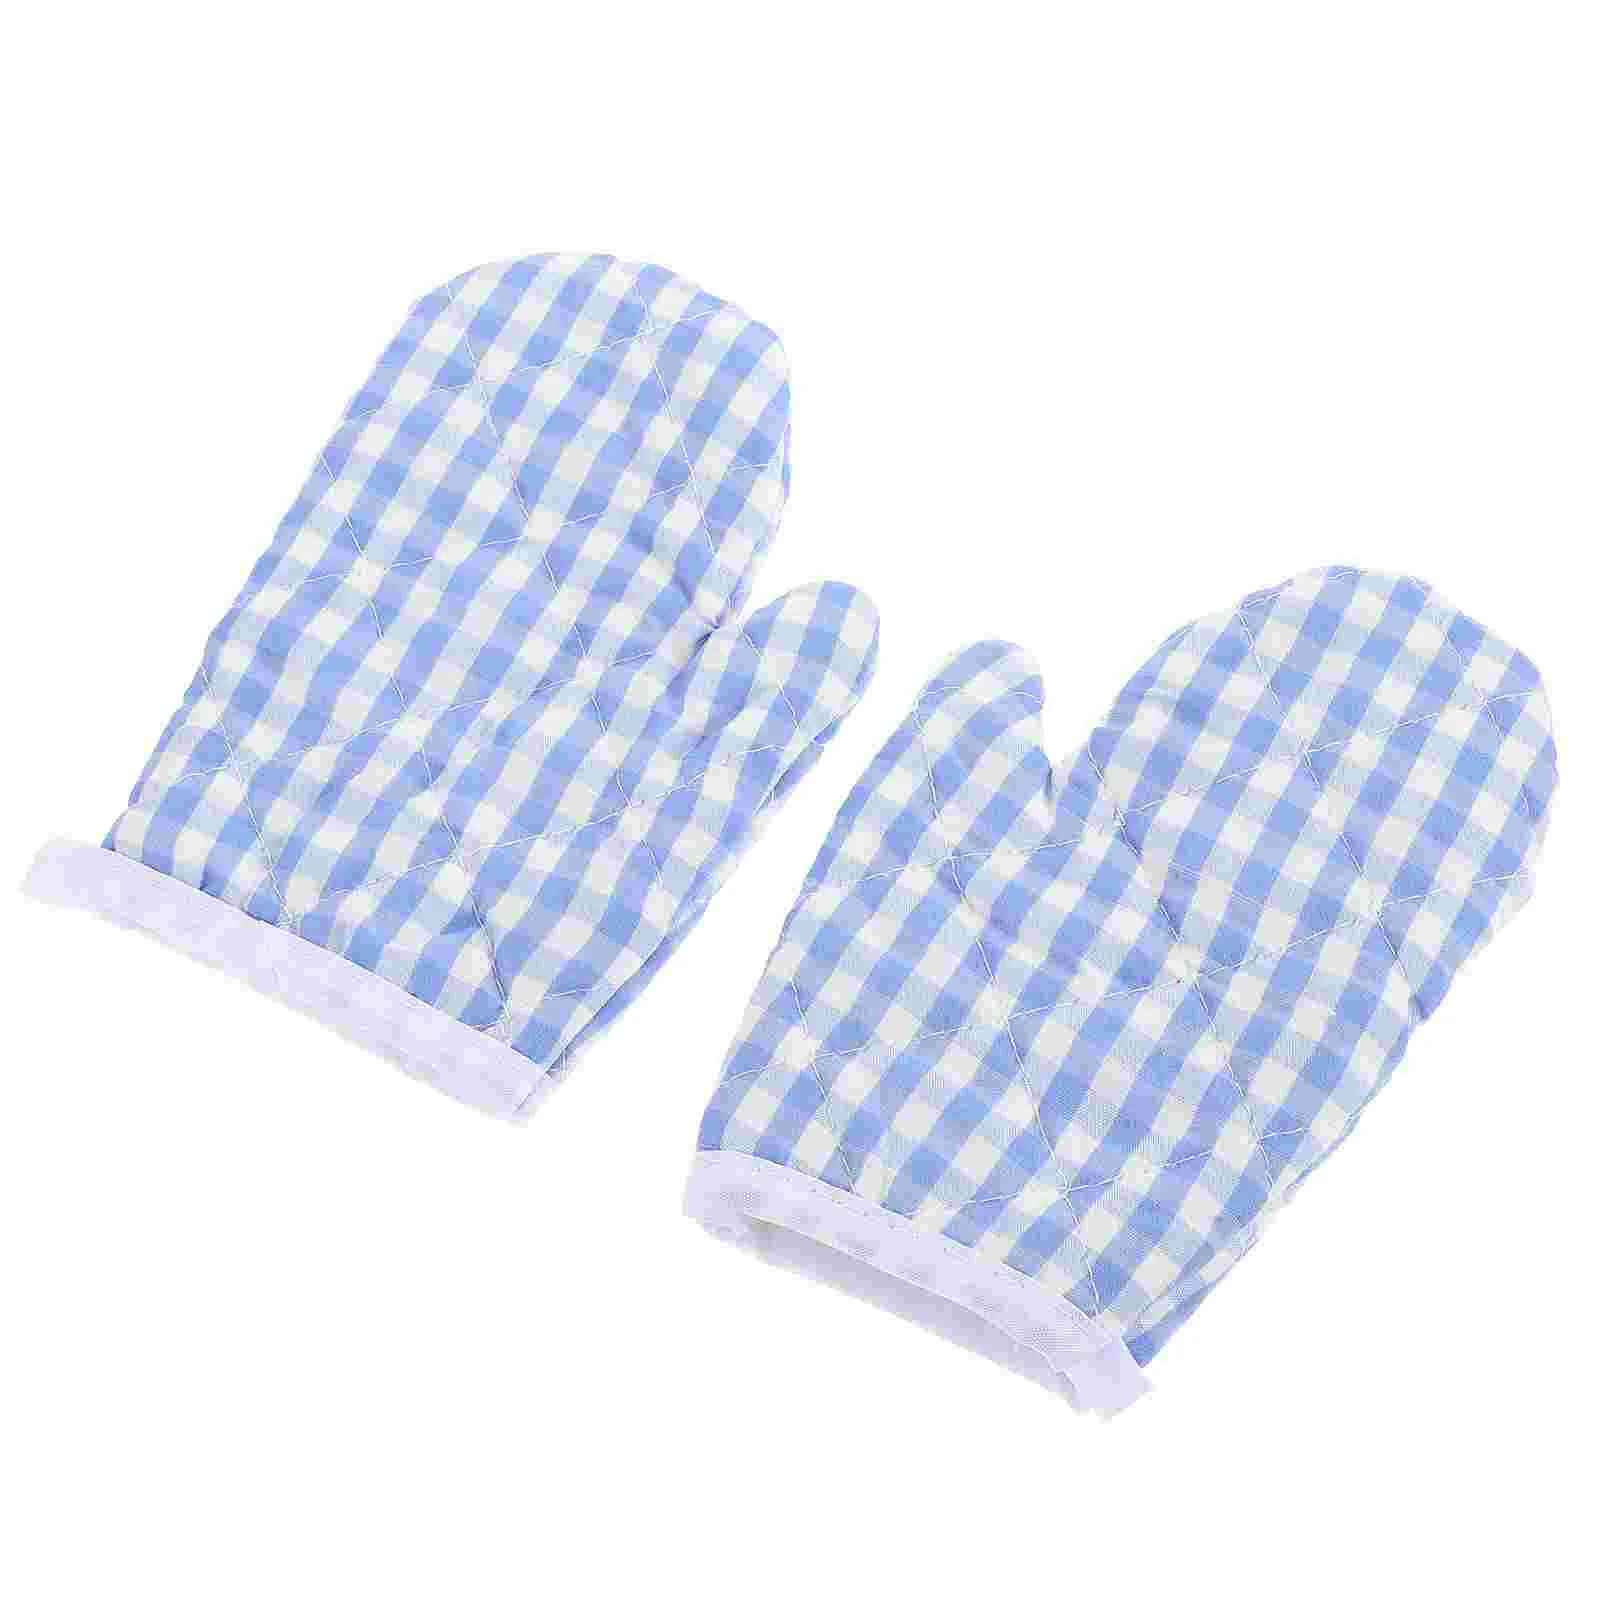 

Gloves Oven Mitts Kids Kitchen Baking Microwave Heat Cooking Resistant Children Mittensglove Grilling Child Barbecue Anti Bbq